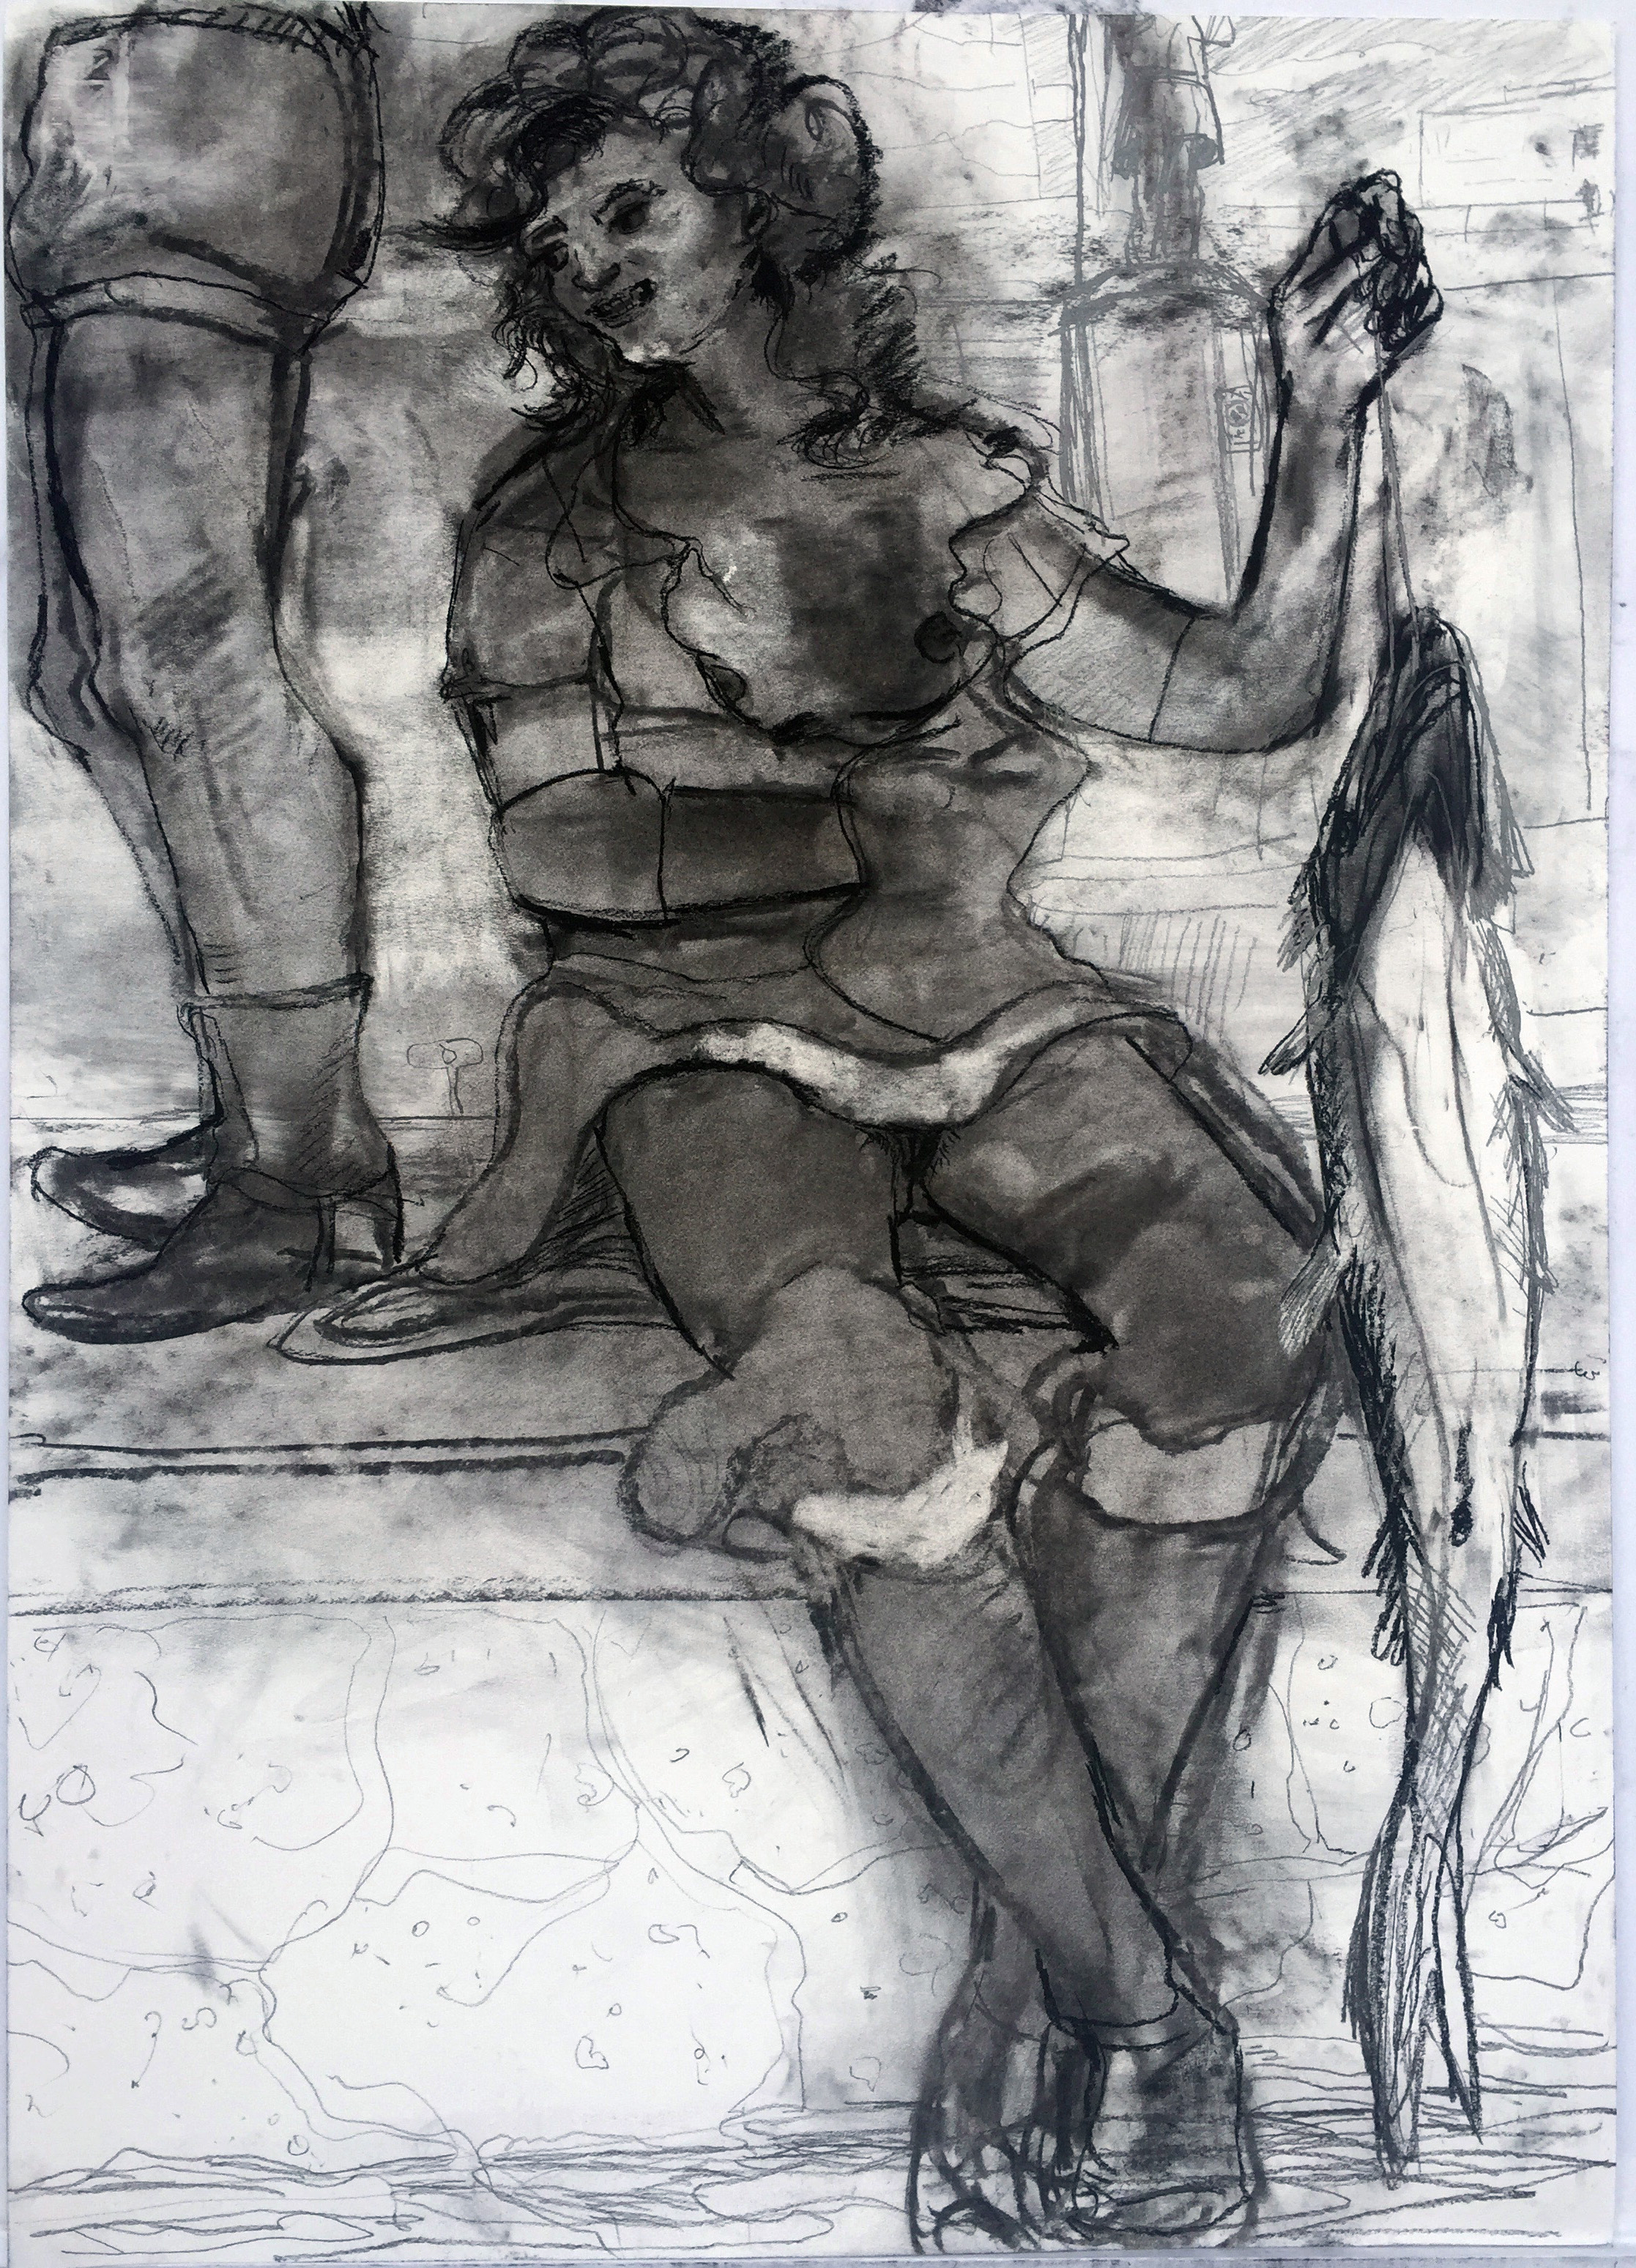 Fish 18 by 24 inches charcoal on paper 2017.jpg